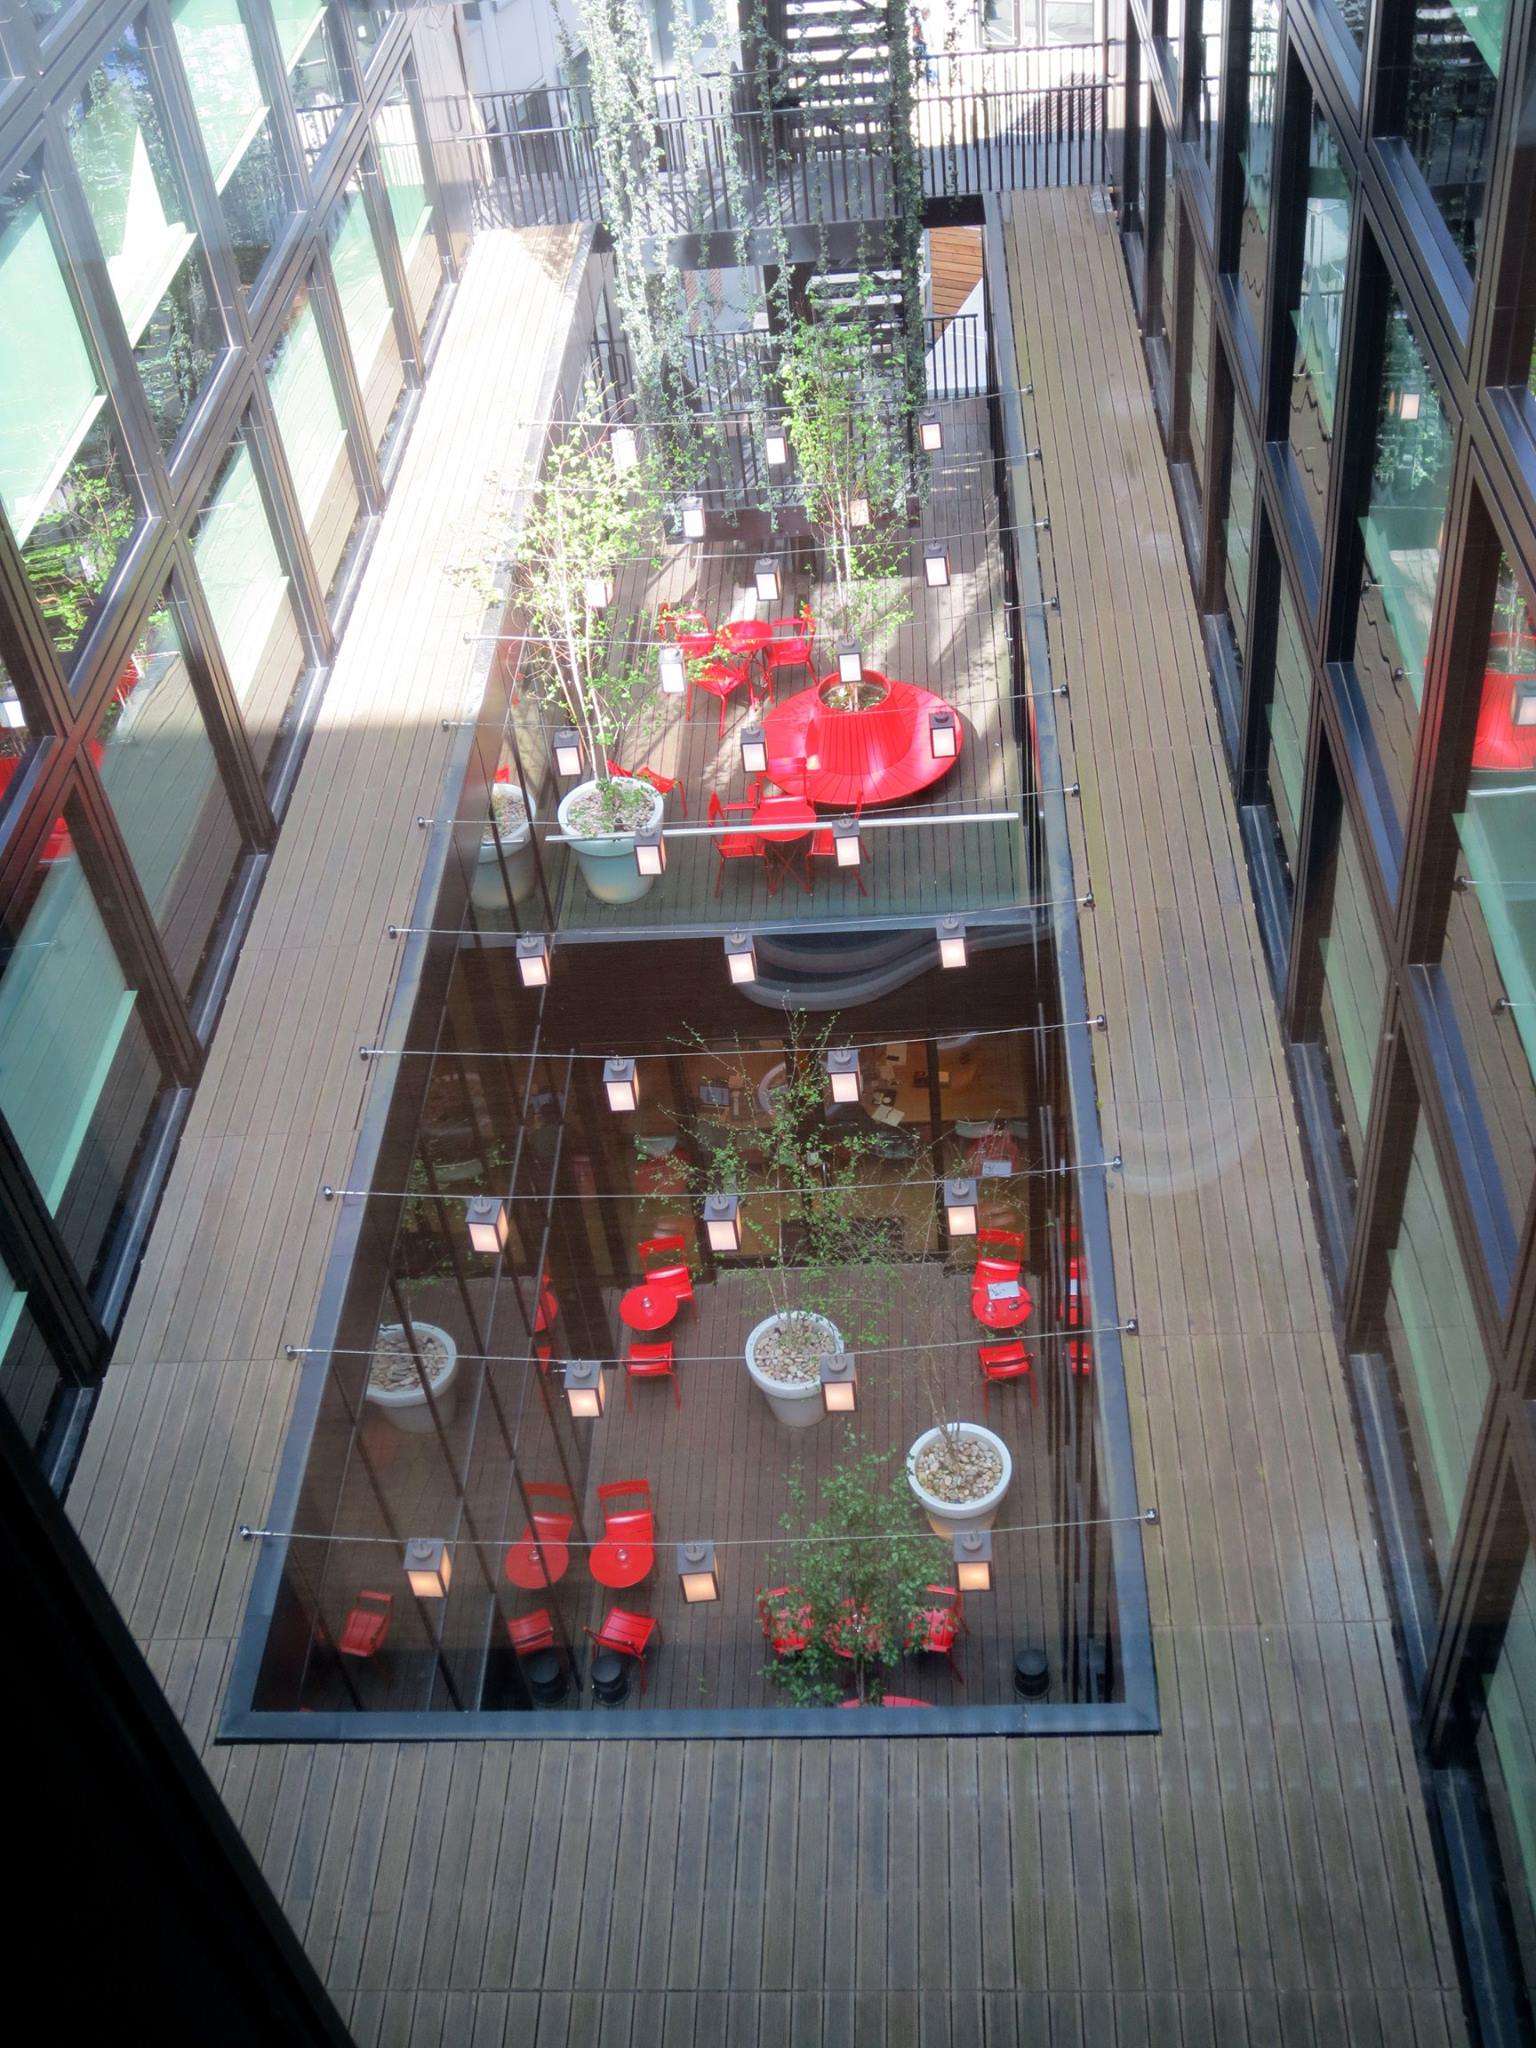 The CitizenM courtyard